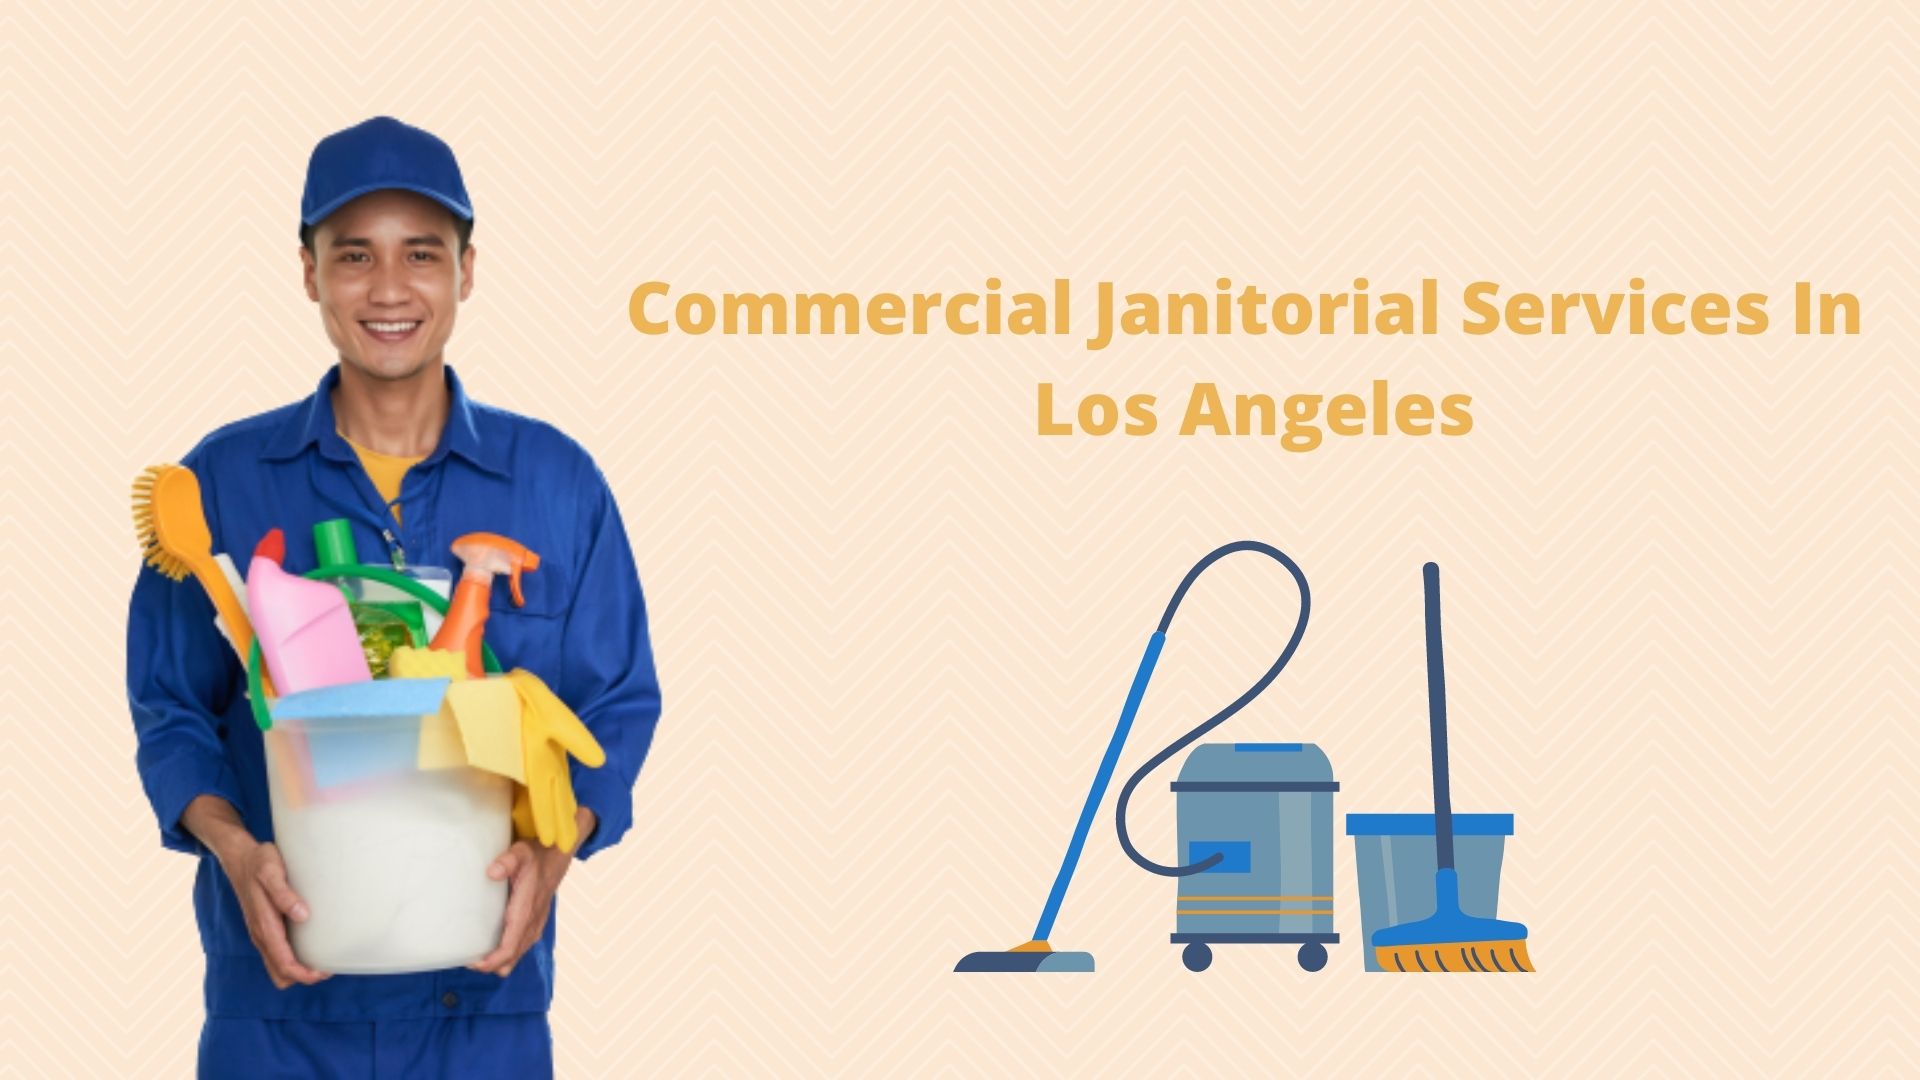 Commercial Janitorial Services In Los Angeles: Get the Job Done Pro